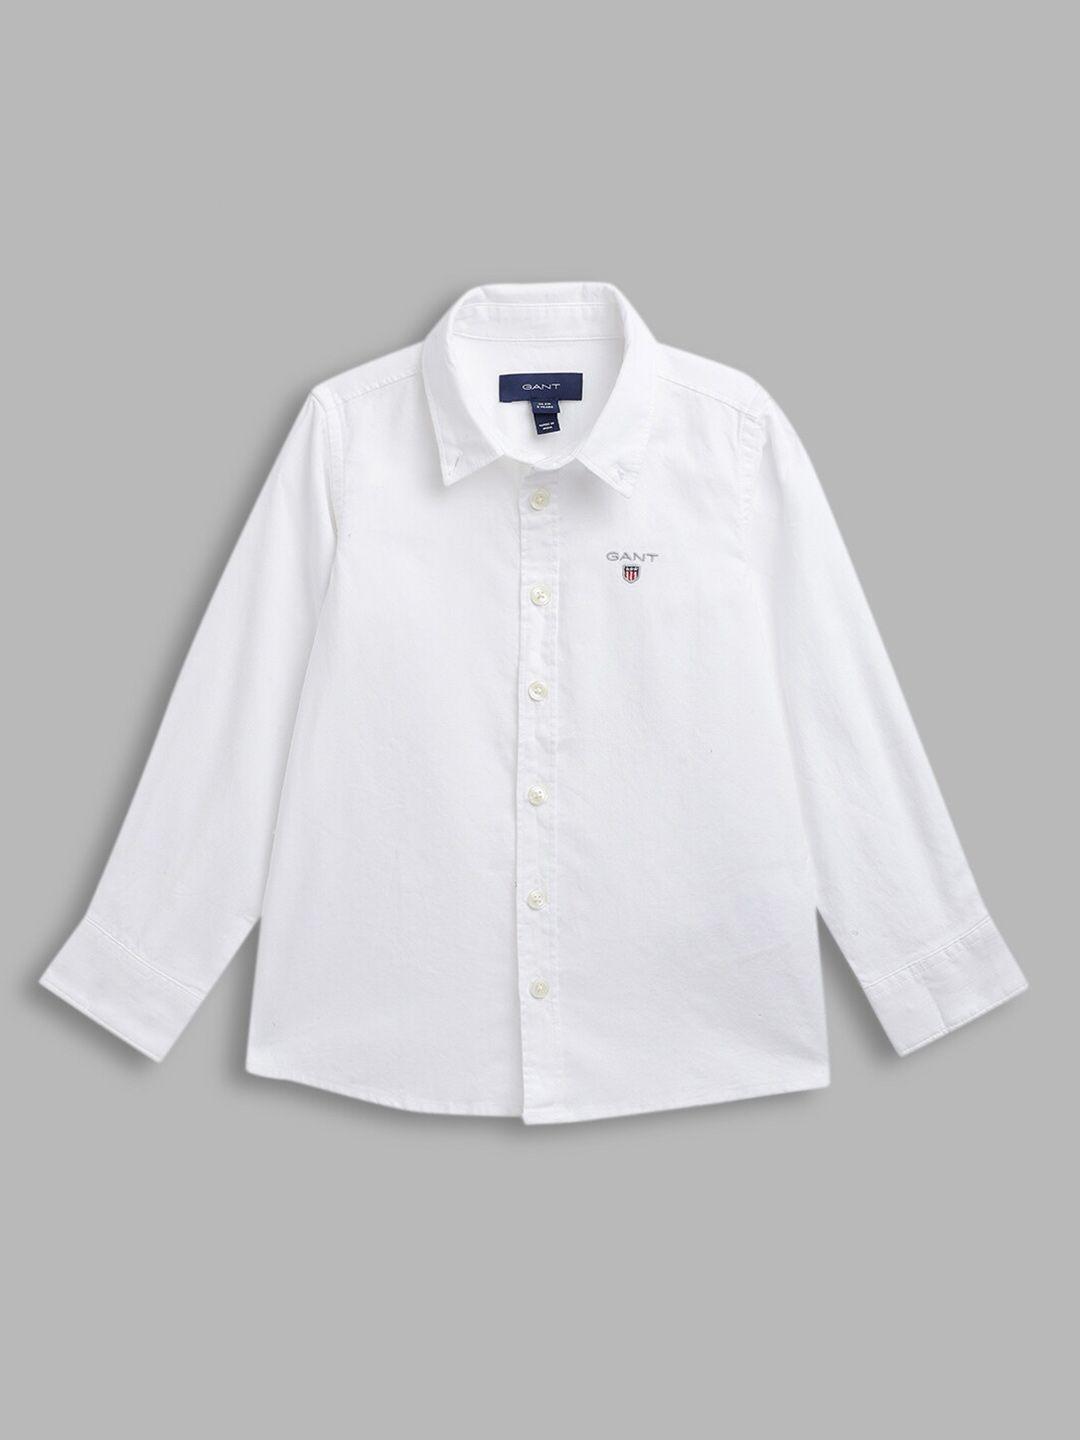 GANT Boys White Classic Regular Fit Solid Cotton Casual Shirt